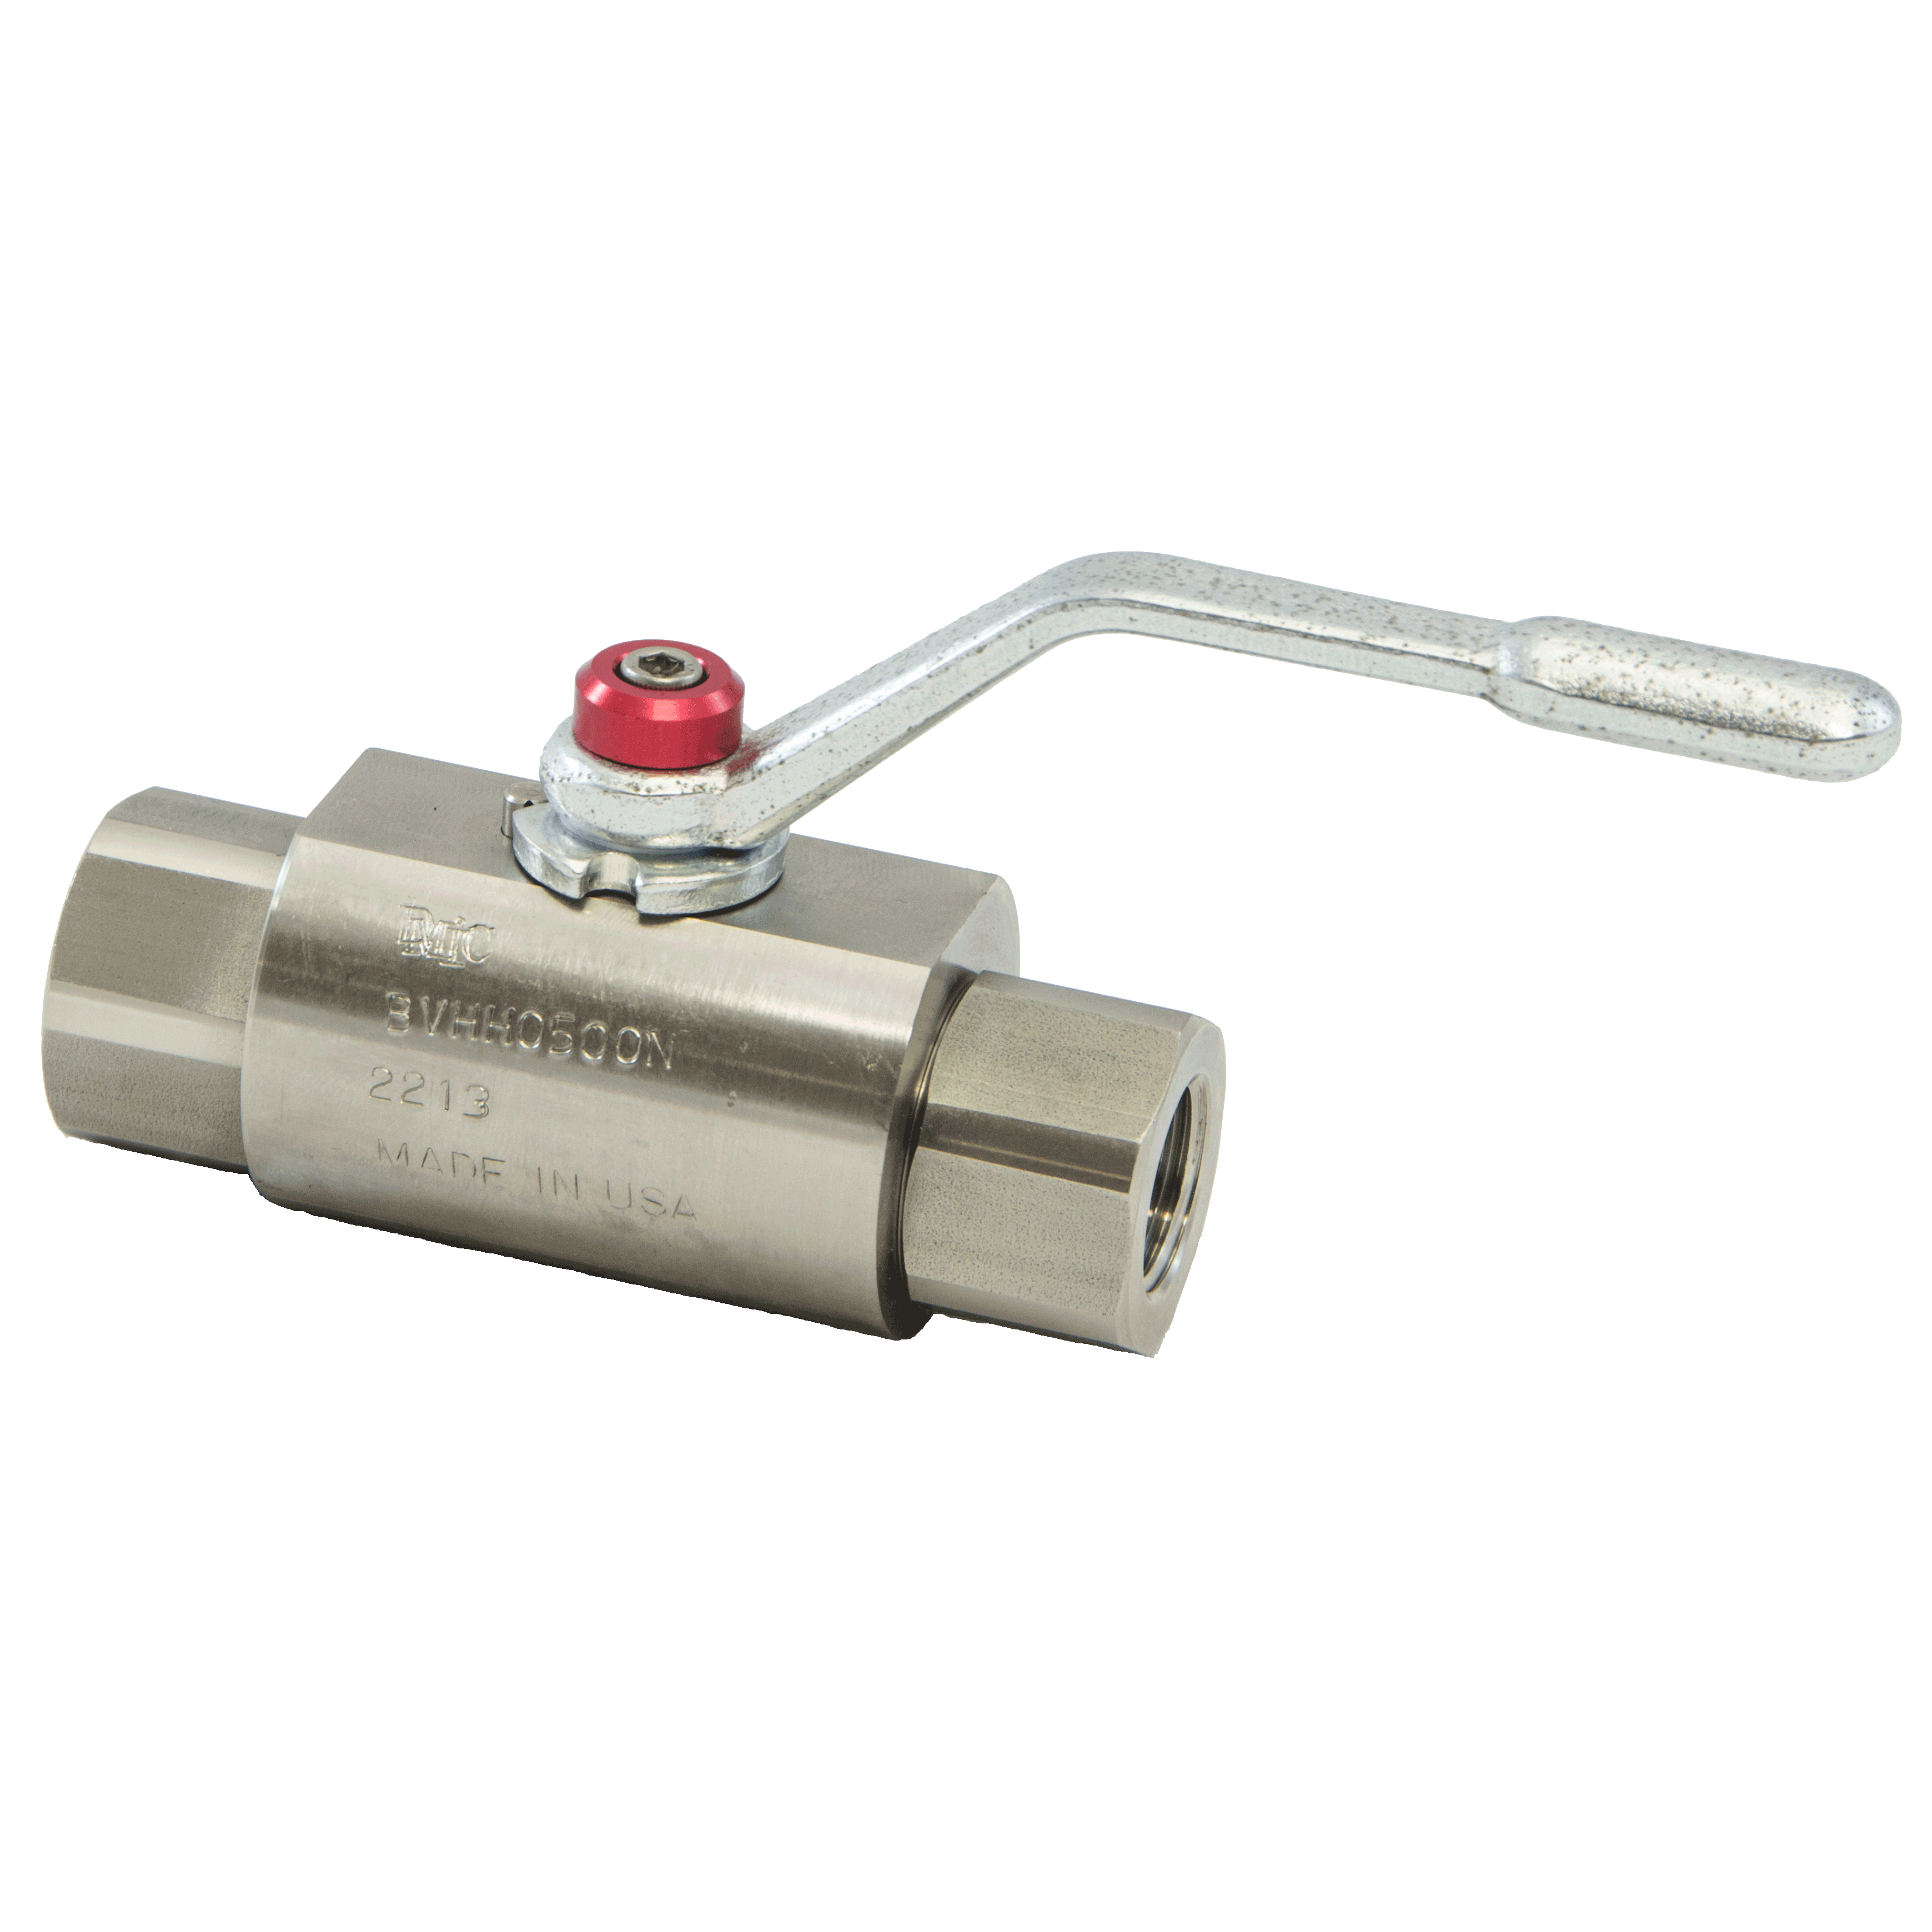 BVHH-1000S-2211 : DMIC Super High Pressure Ball Valve, #16 SAE (1), 316 Stainless Steel, 10000psi, Two-Way